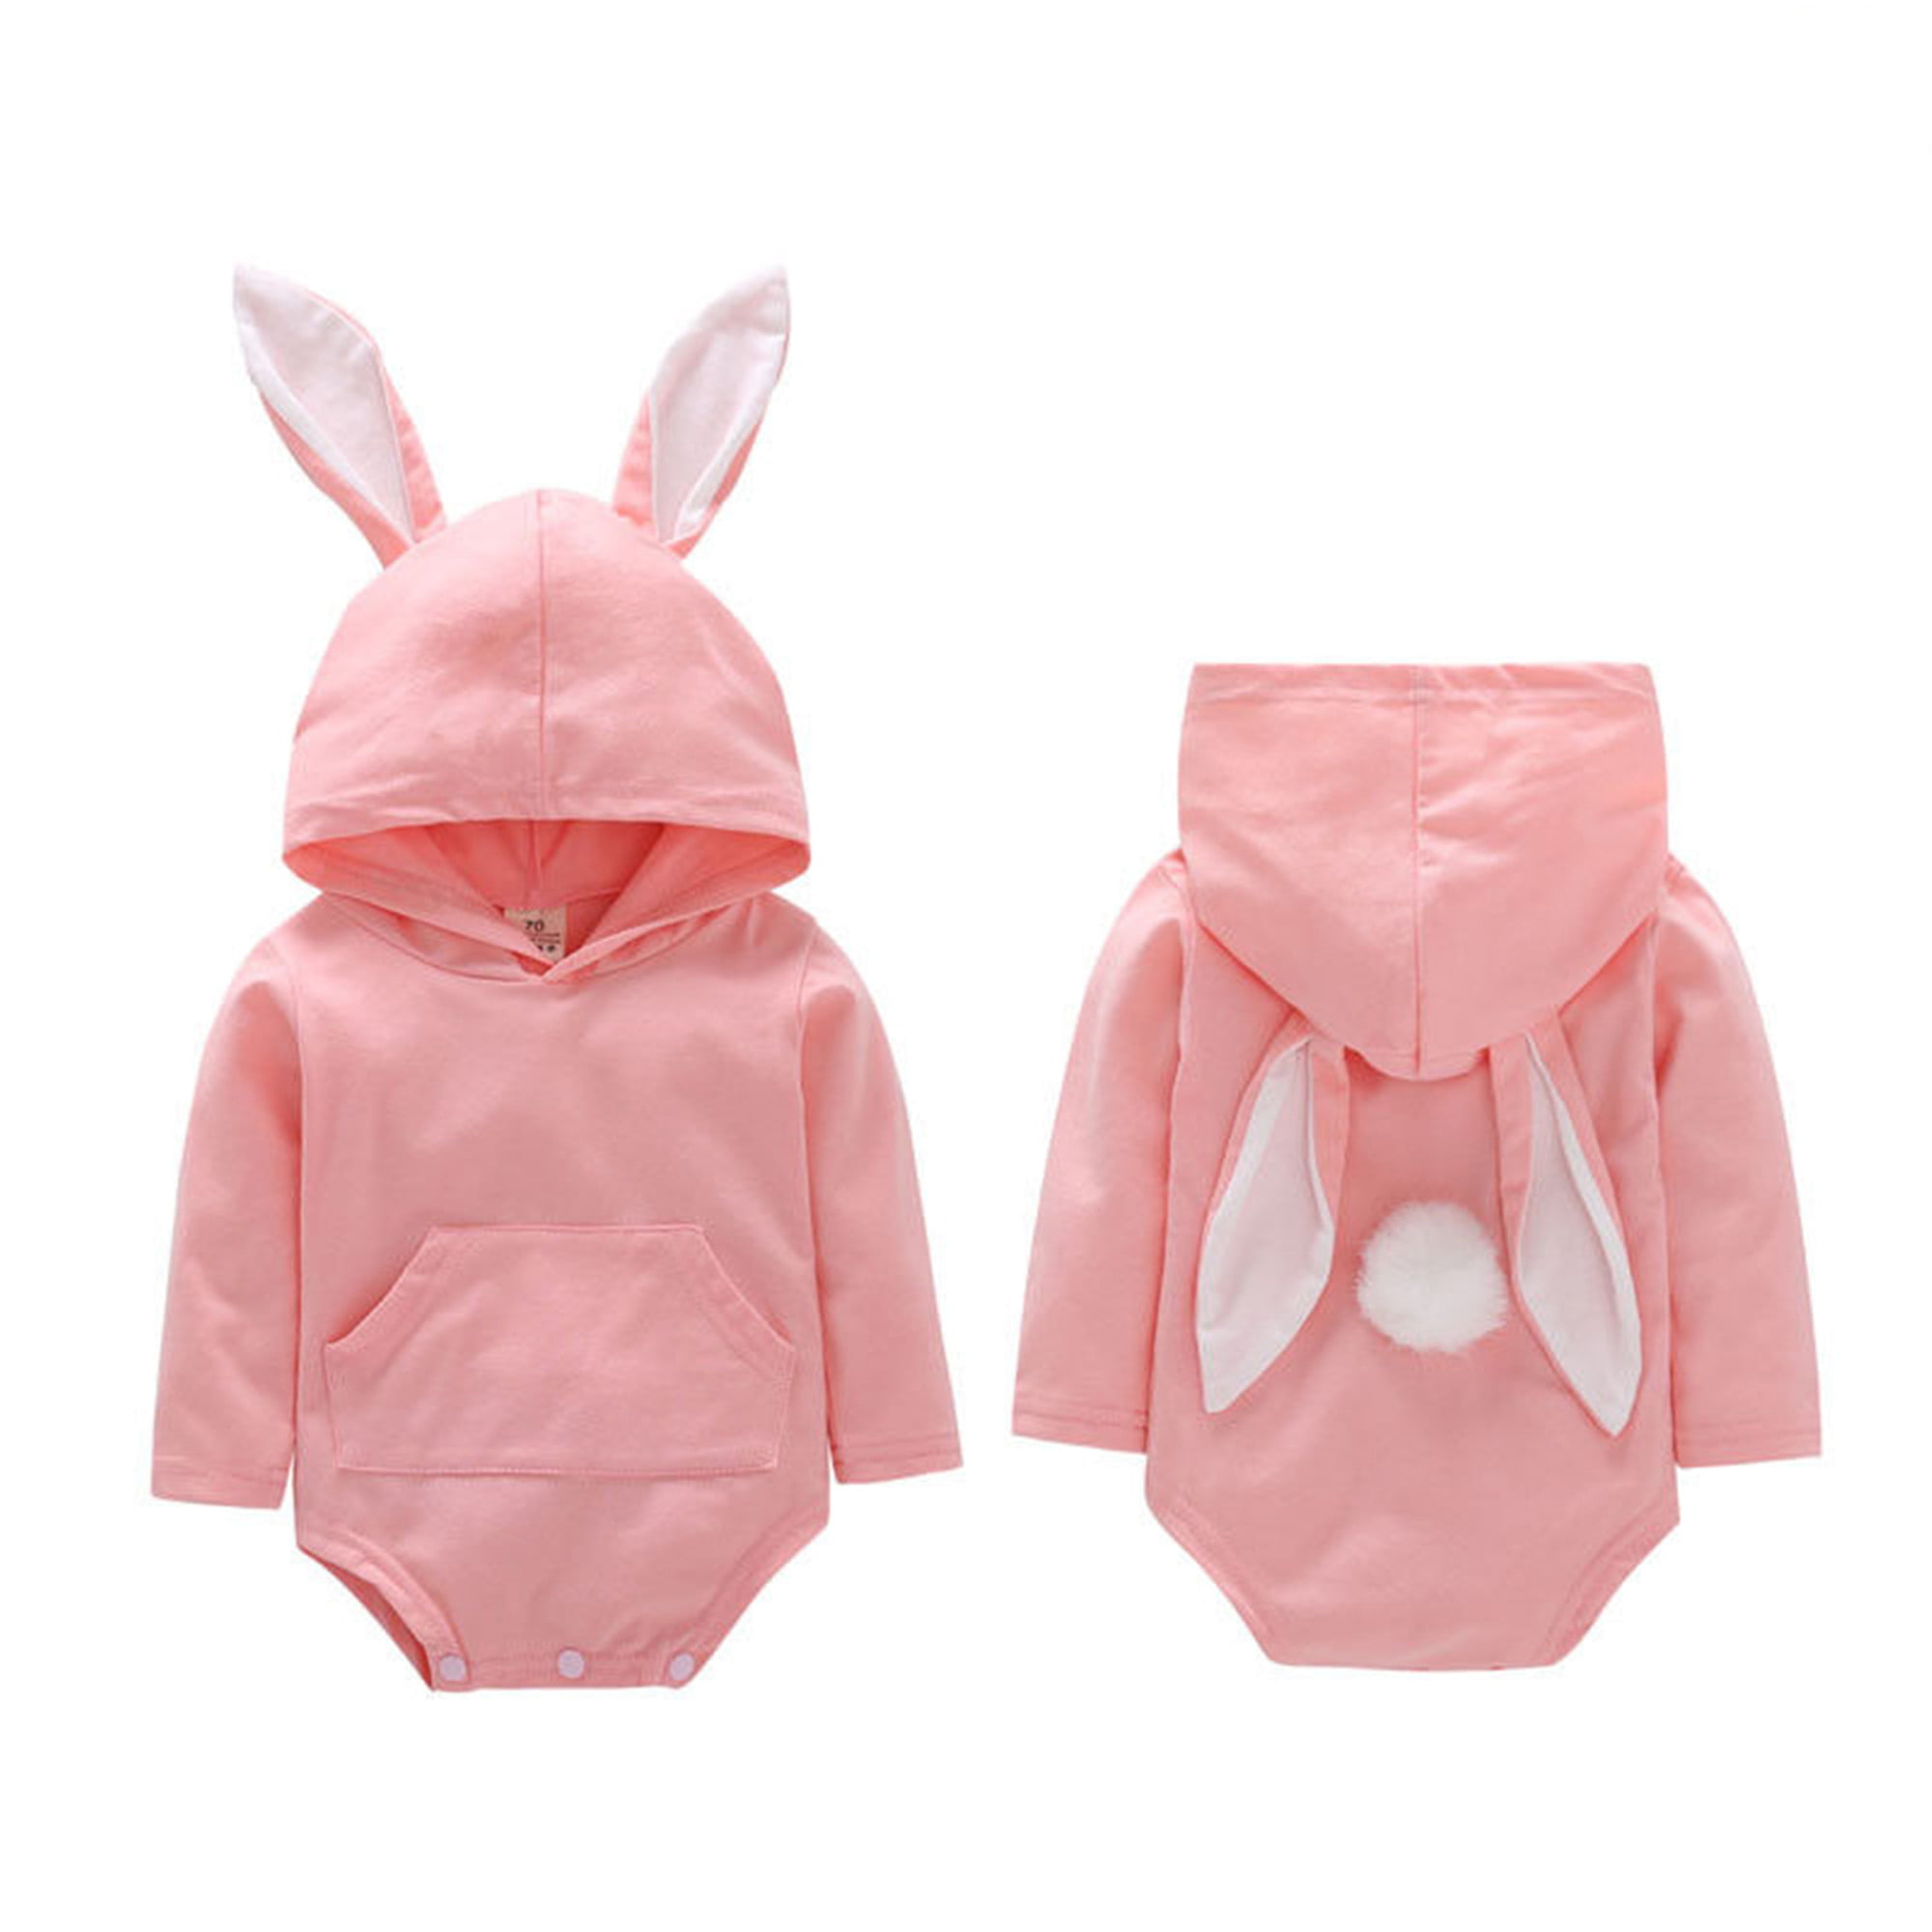 Tensay Newborn Infant Baby Girl Cartoon Bunny Rabbit Easter Lace Bodysuit Clothes Outfits Baby Romper